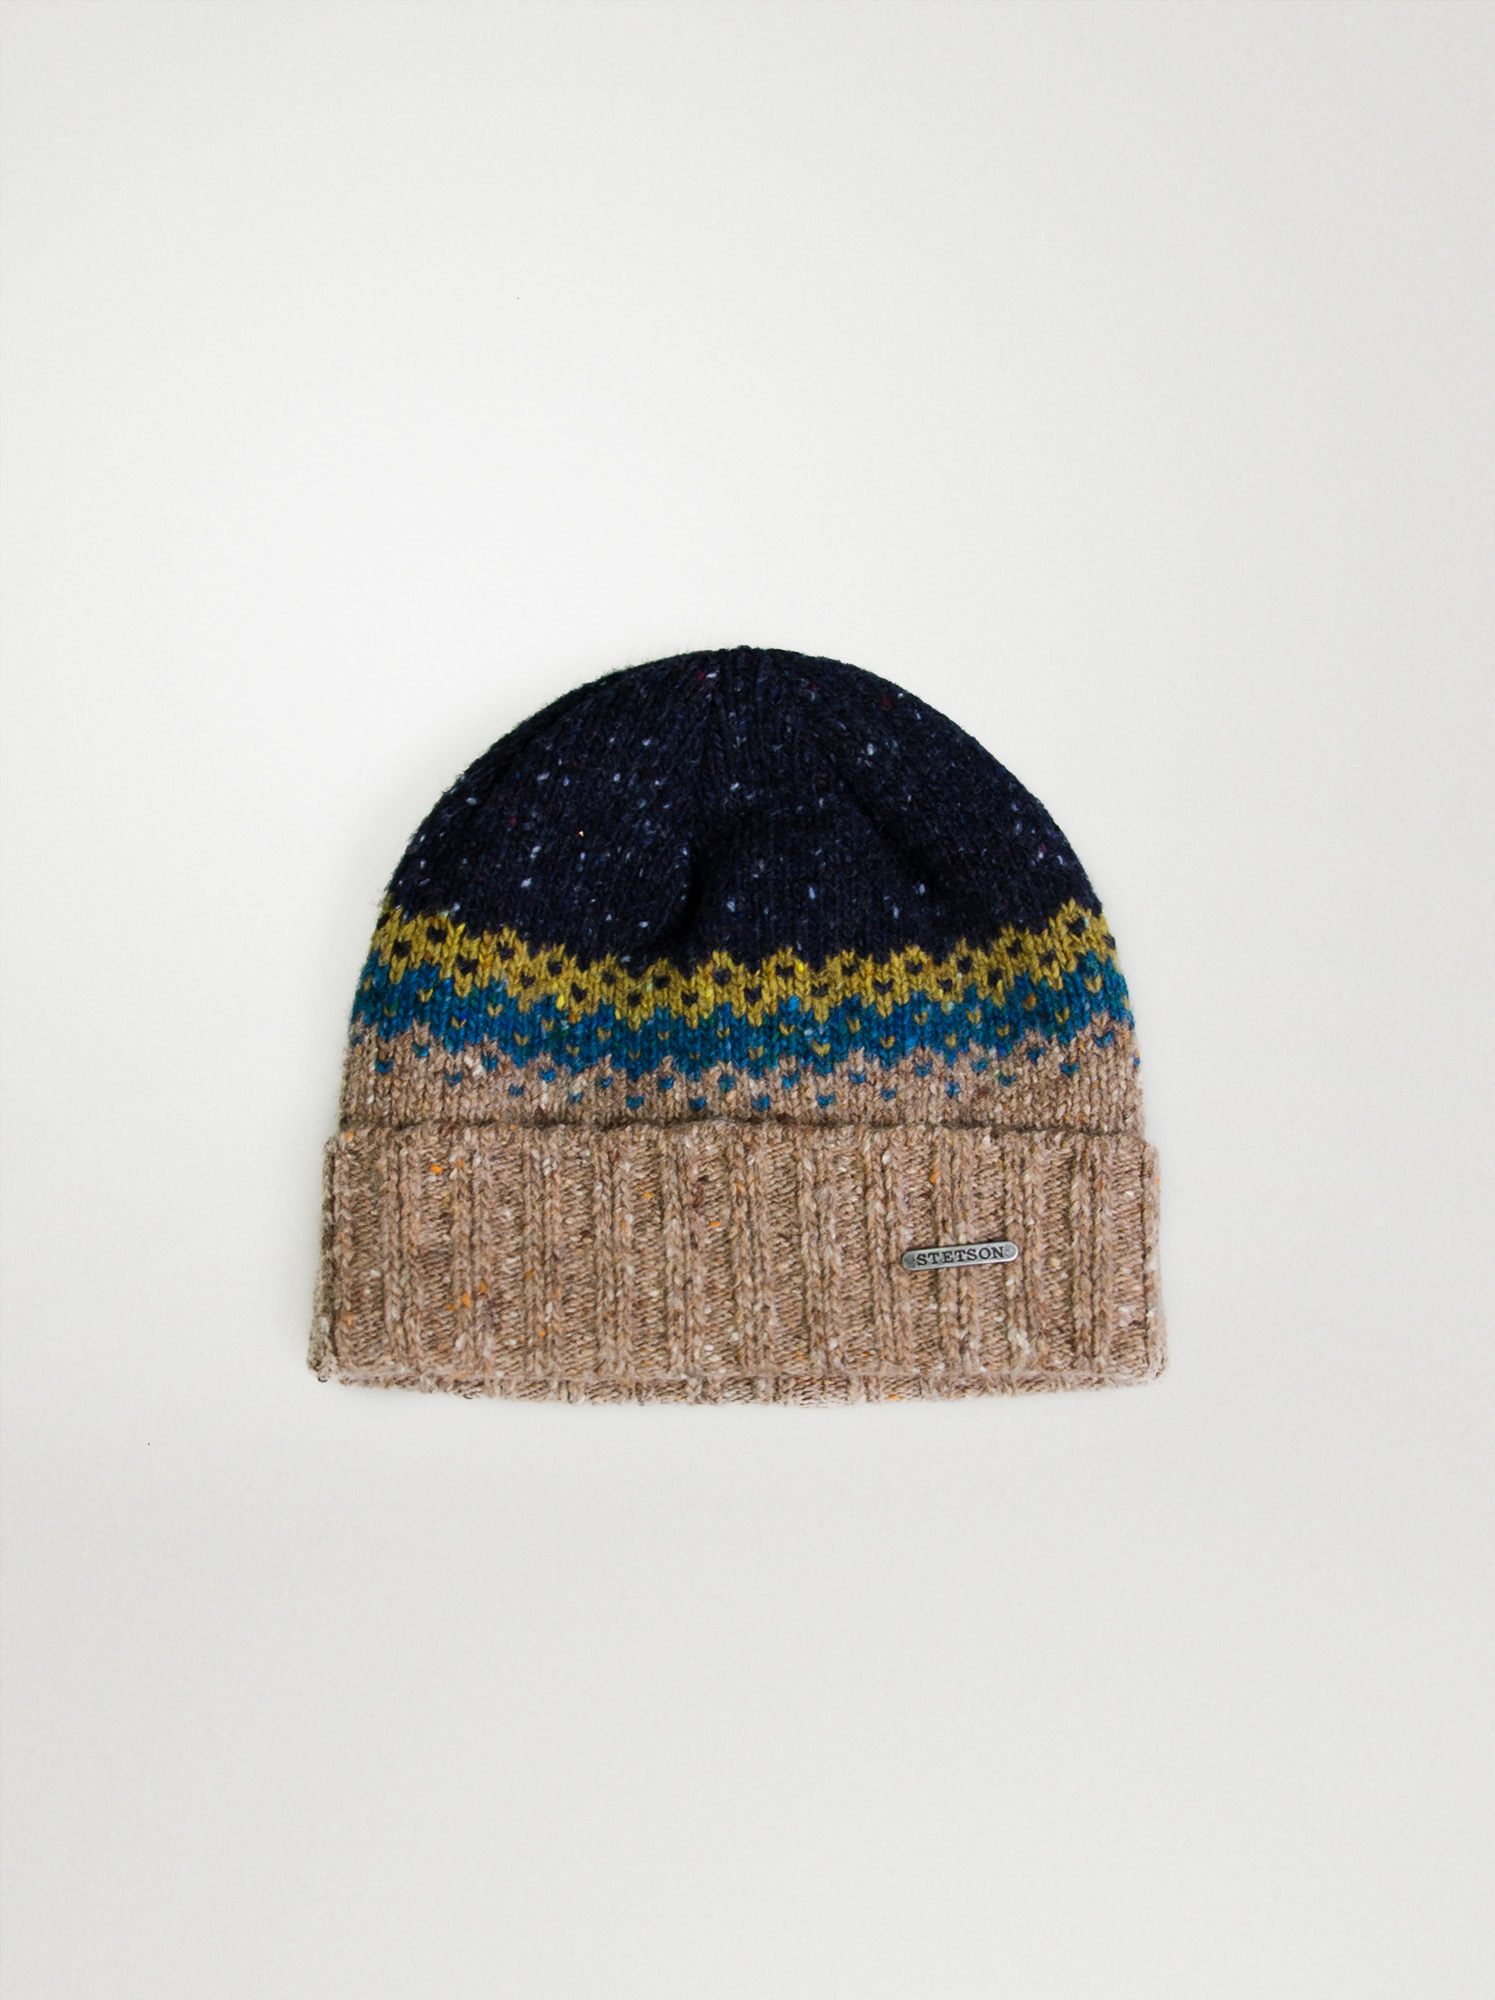 STETSON Beanie hat with wool - Stetson image 1